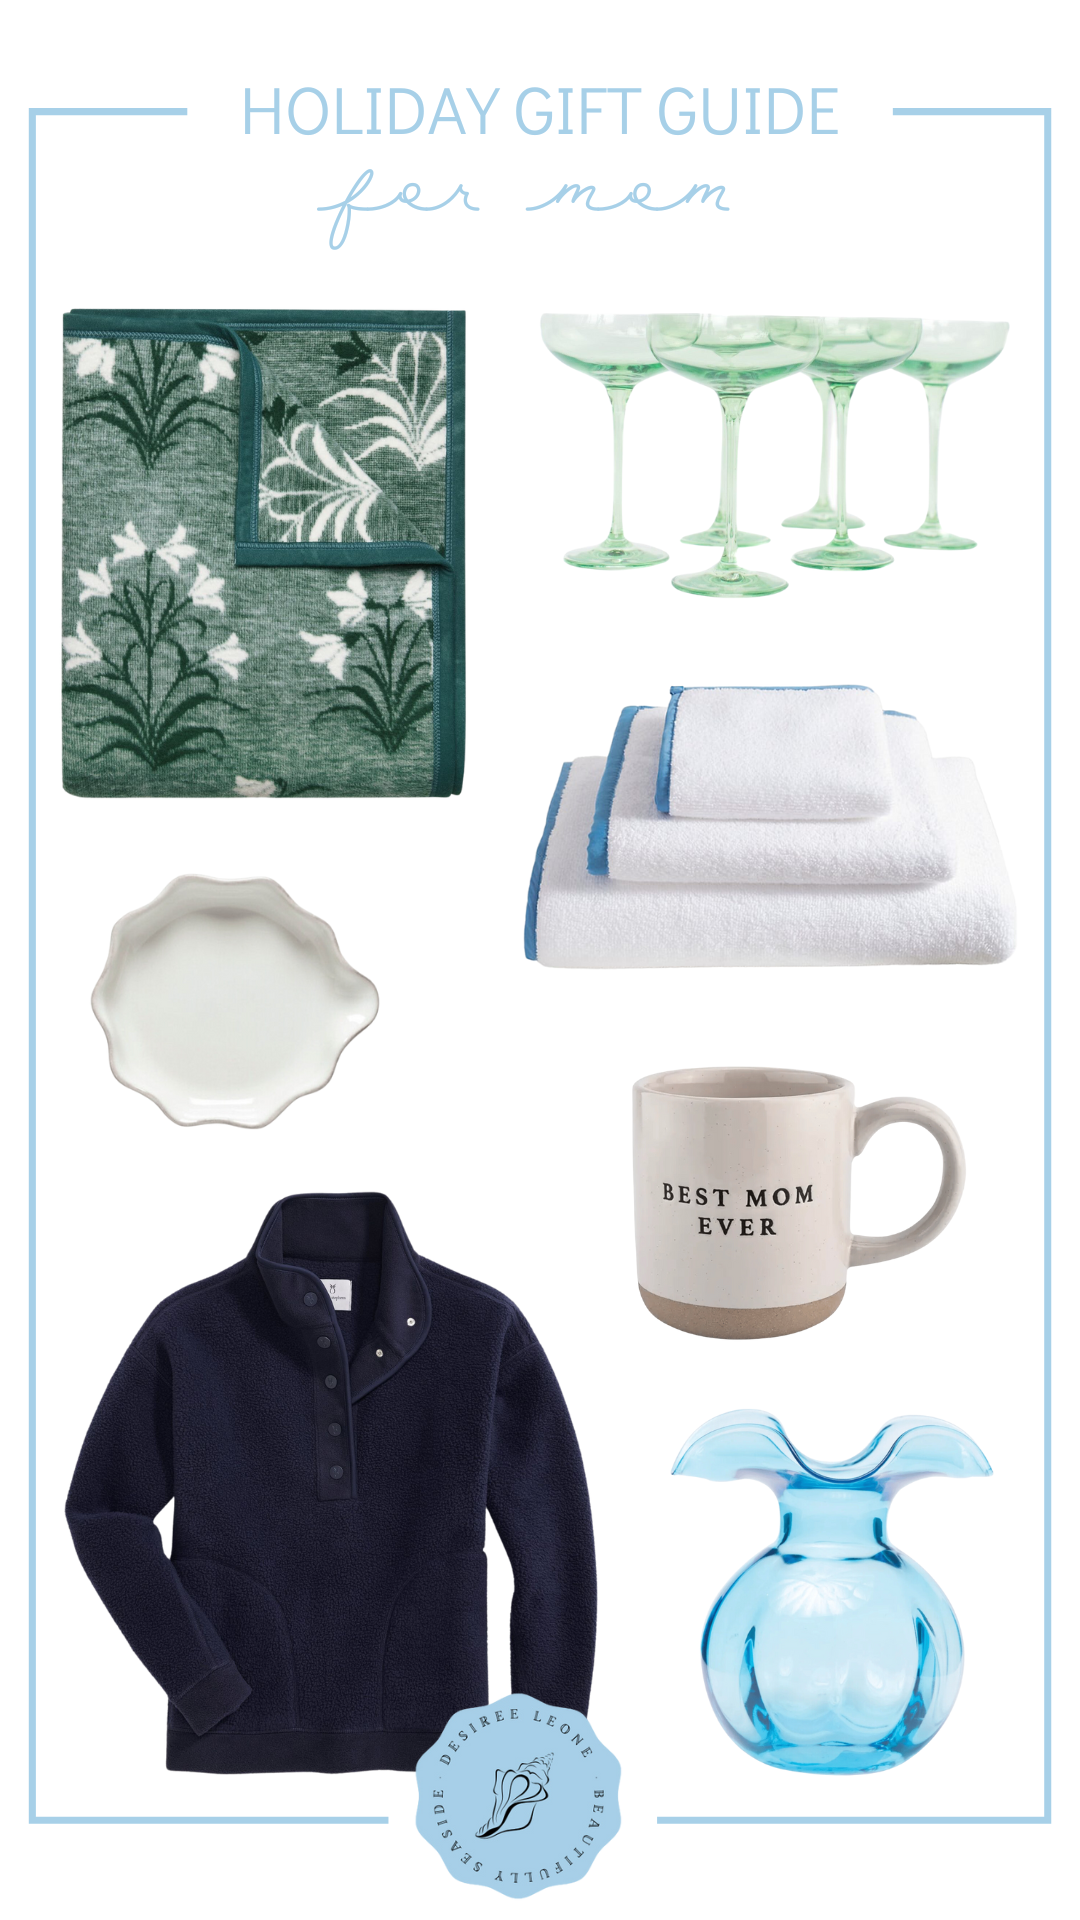 Desiree Leone of Beautifully Seaside shares a holiday gift guide for mom, featuring the best gifts to give this season.